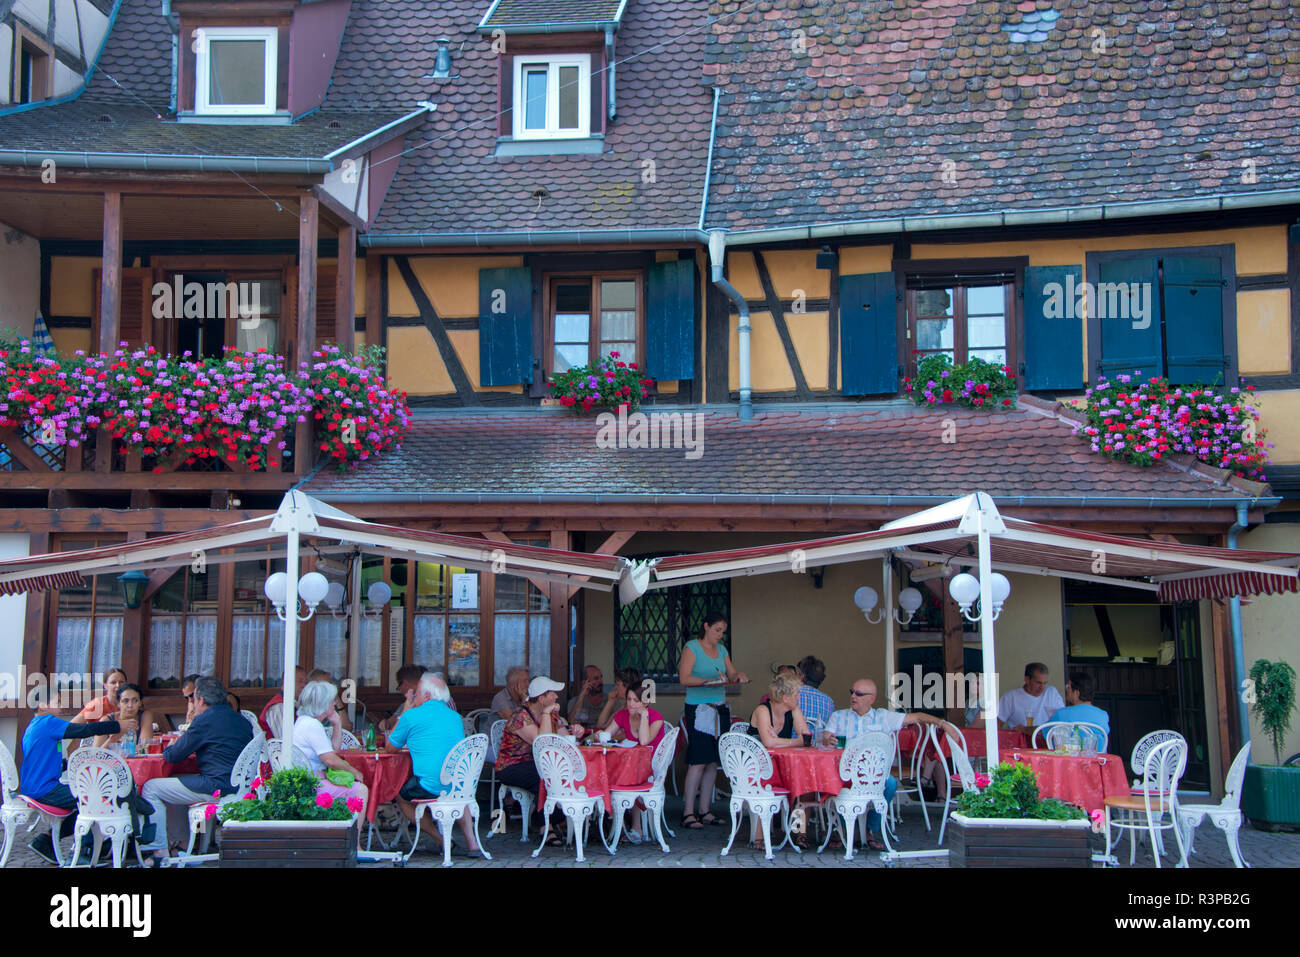 France, Alsace, Eguisheim. People fill an outdoor restaurant in front of a traditional building in Equisheim village. Stock Photo